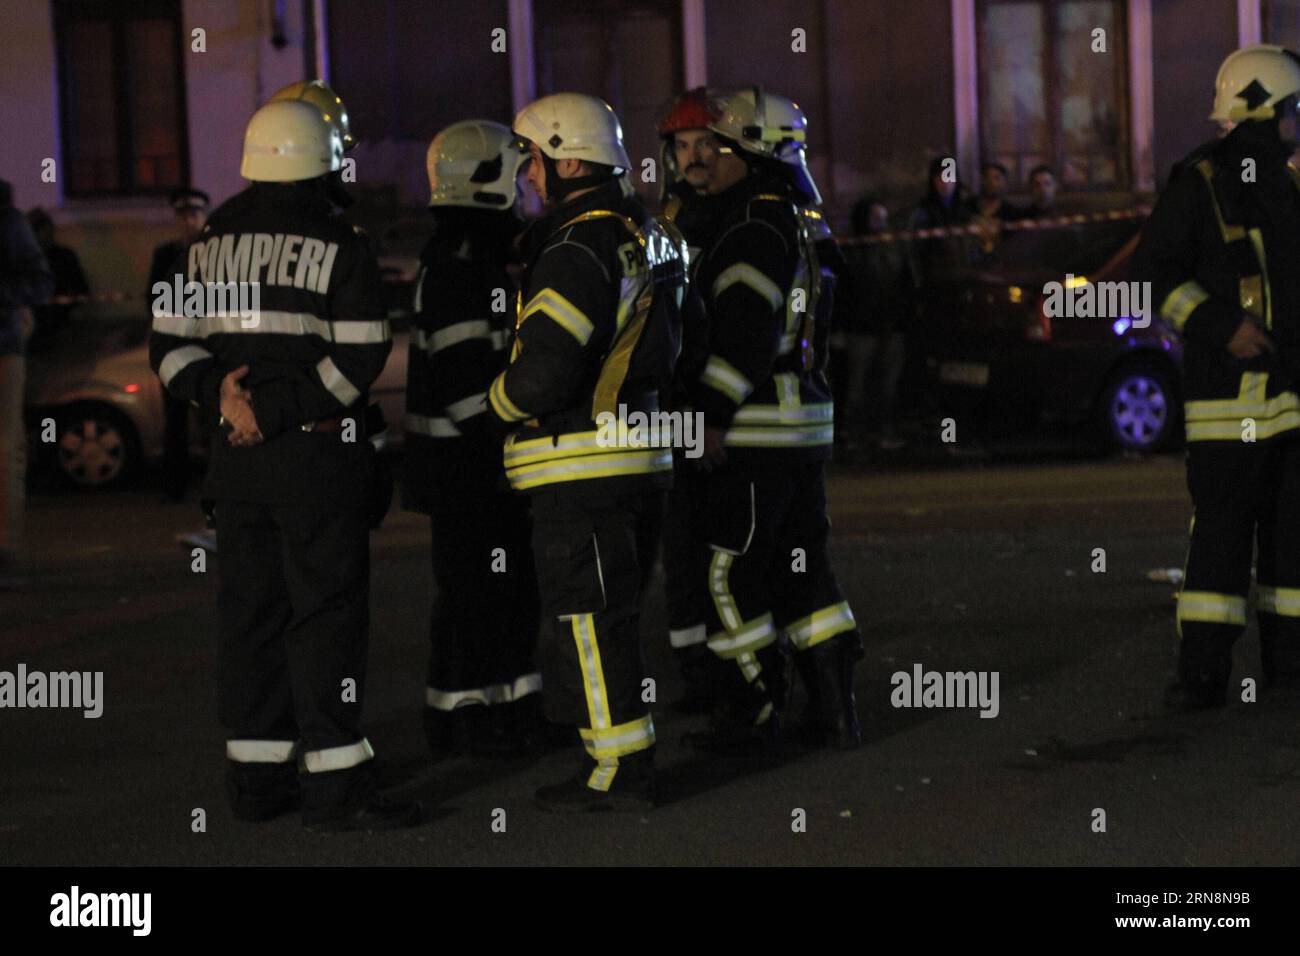 (151031) -- BUCHAREST, Oct. 31, 2015 -- Firemen gather at the nightclub which caught fire in Bucharest, capital city of Romania, Oct. 31, 2015. The nightclub fire late Friday followed by explosions has already caused 26 dead and some 180 wounded in downtown Bucharest, authorities announced early Saturday. ) ROMANIA-BUCHAREST-NIGHTCLUB-FIRE GabrielxPetrescu PUBLICATIONxNOTxINxCHN Rumänien: Tote und Verletzte nach Feuer in Nachtclub in Bukarest   Bucharest OCT 31 2015 firemen gather AT The Night Club Which Caught Fire in Bucharest Capital City of Romania OCT 31 2015 The Night Club Fire Late Frid Stock Photo